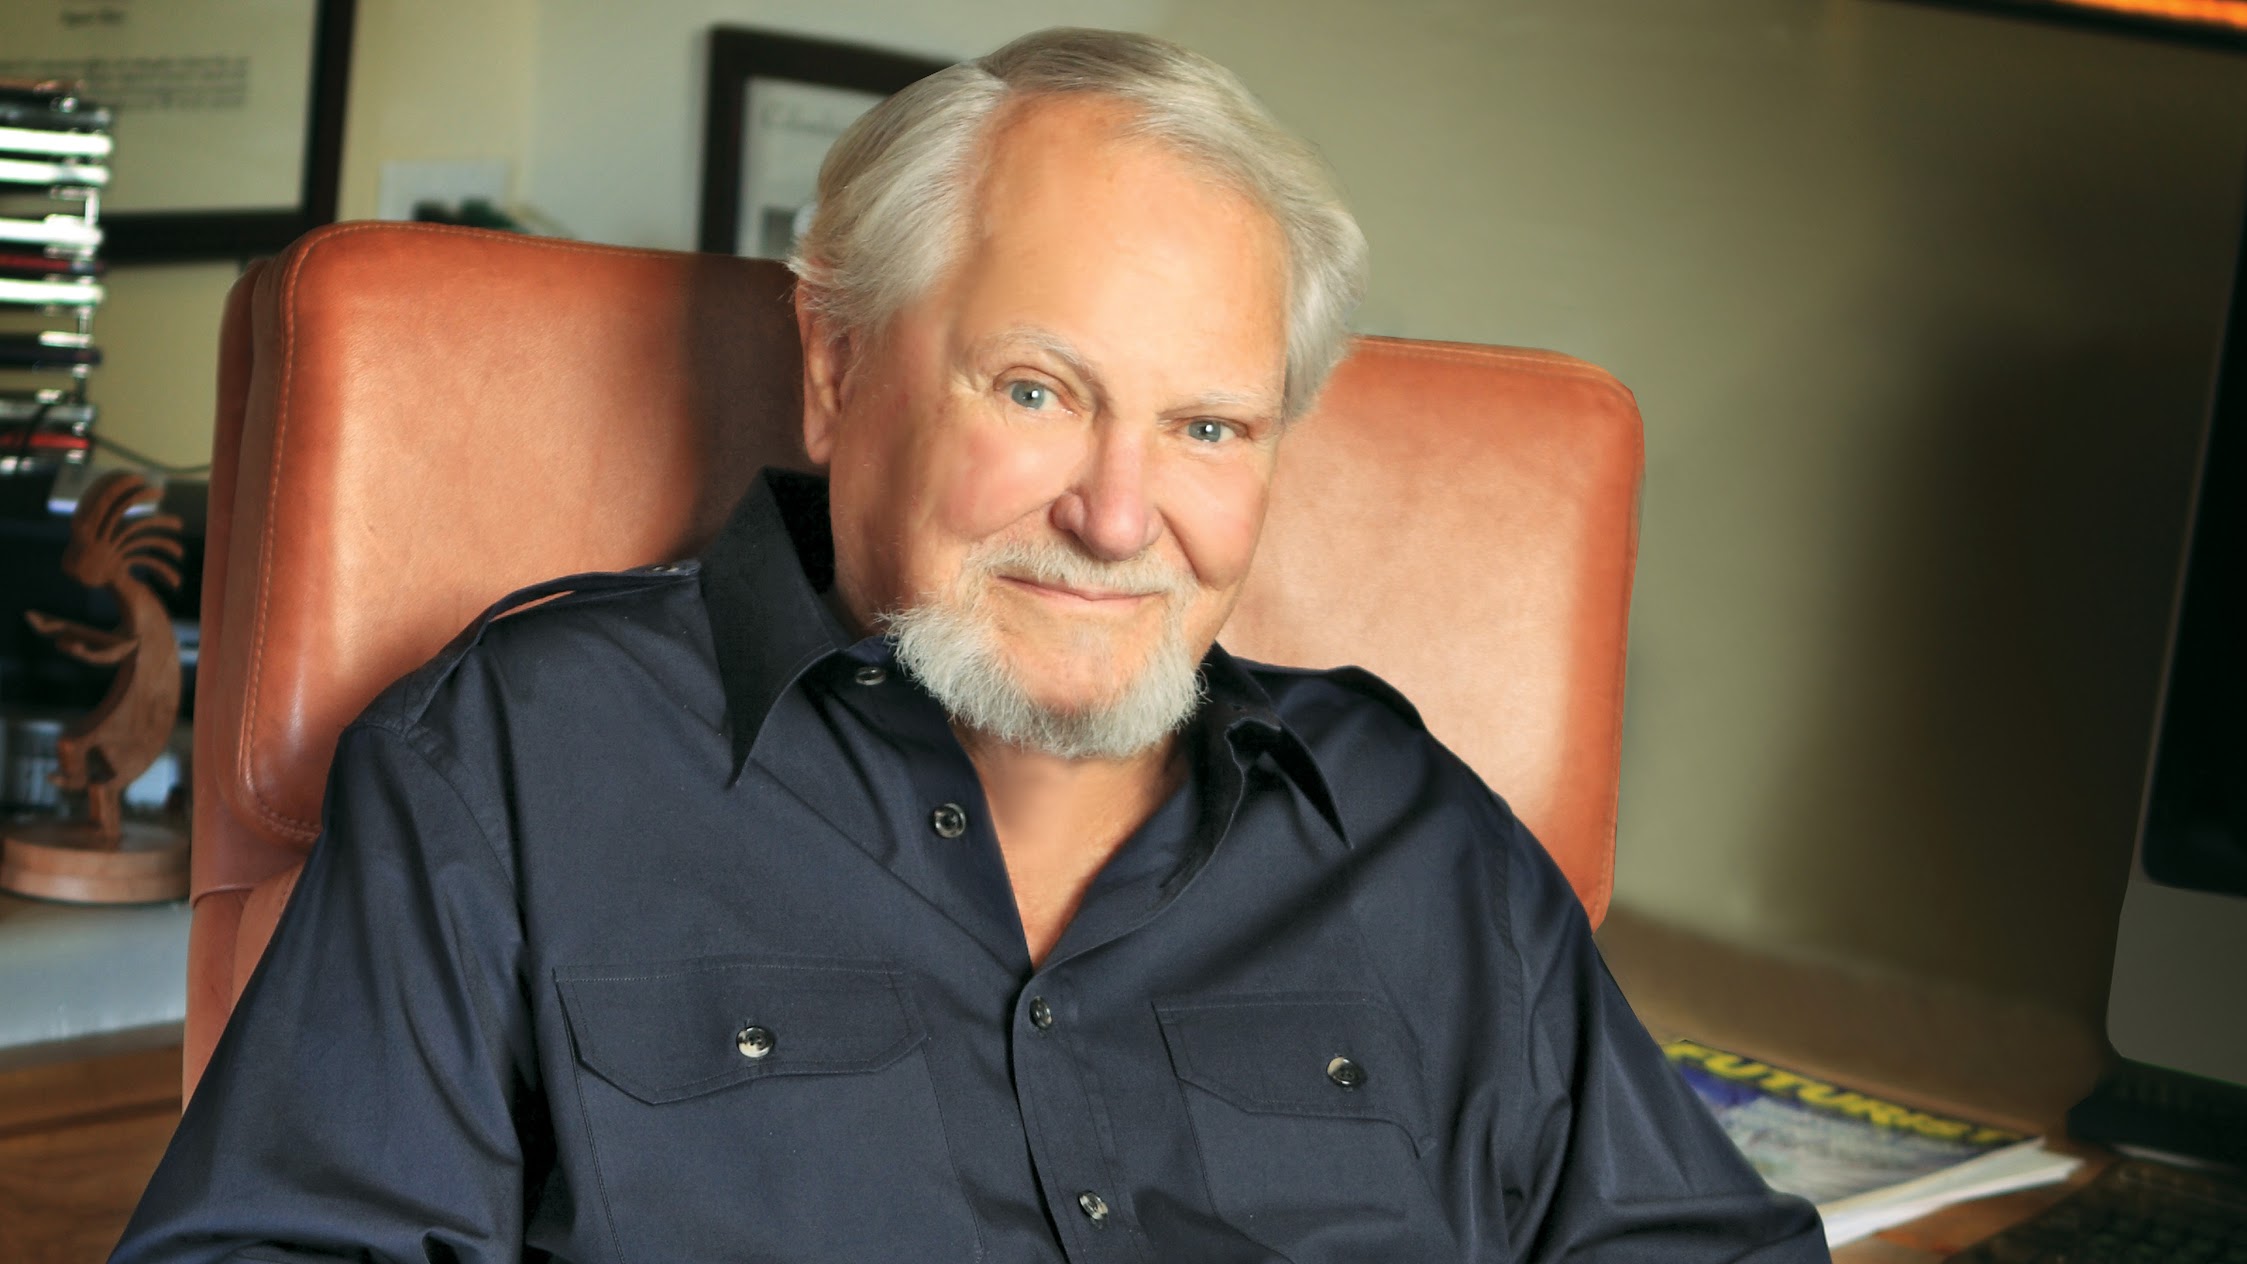 Clive Cussler Wiki Bio Age Net Worth Movies Best Books Married Wife 1035